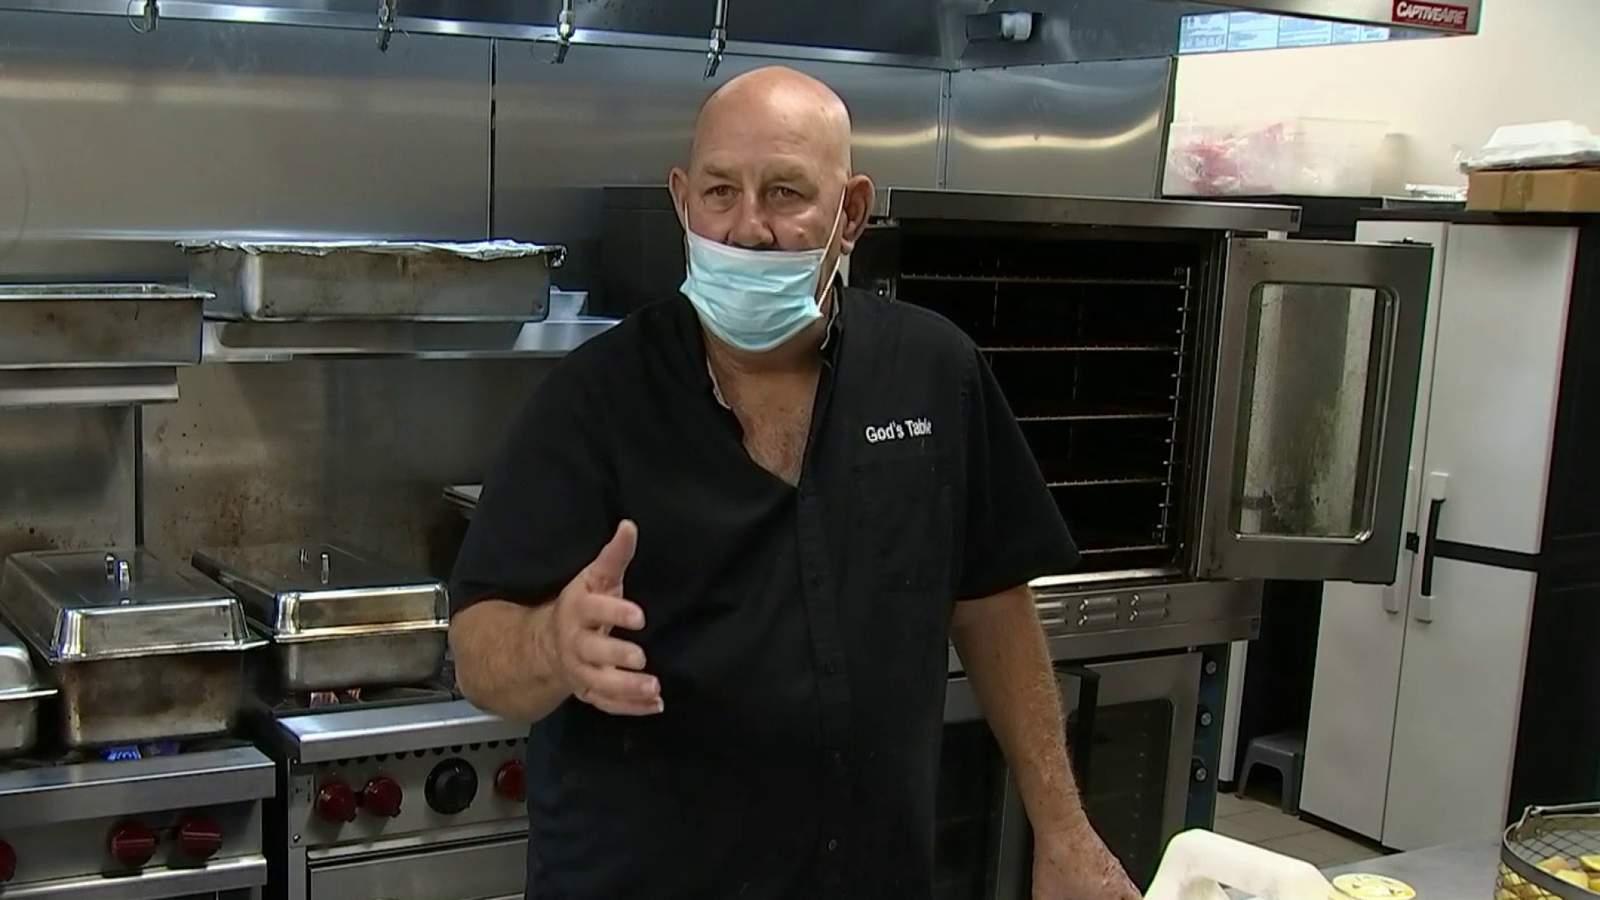 ‘I have a desire to serve:’ Caterer finds his purpose in the kitchen while helping others